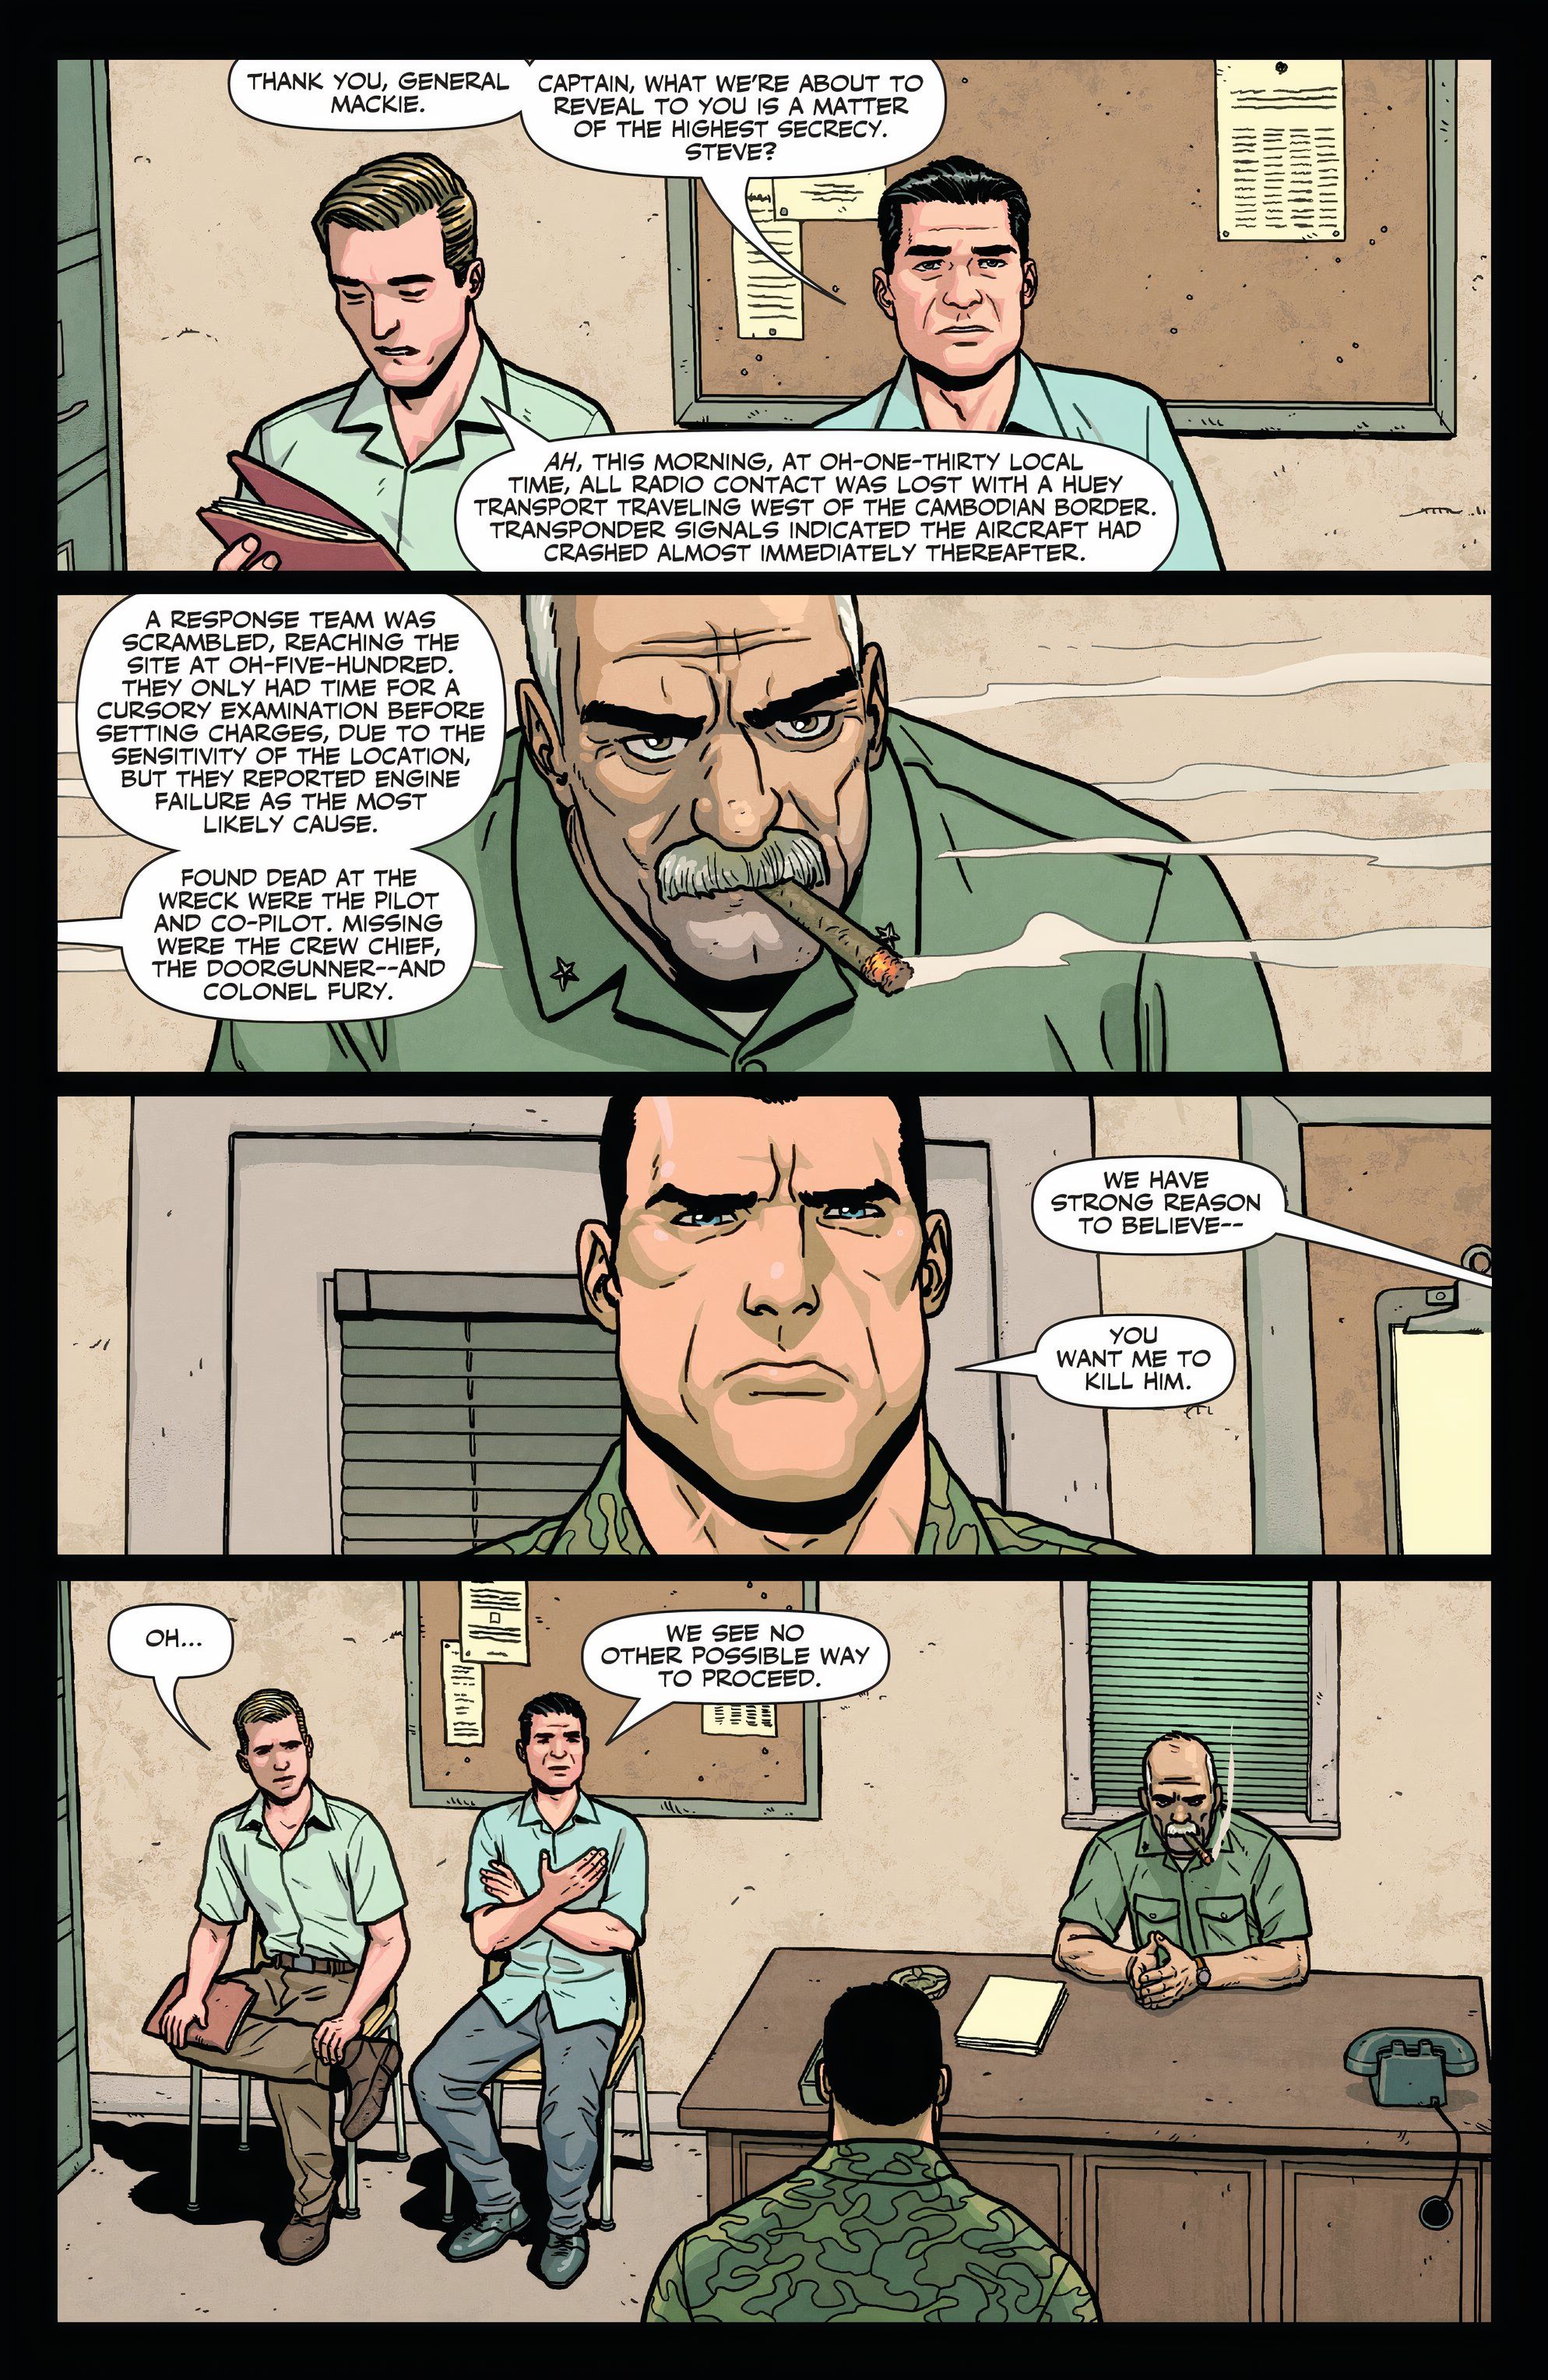 Get Fury #1 Frank Castle is assigned to kill Nick Fury